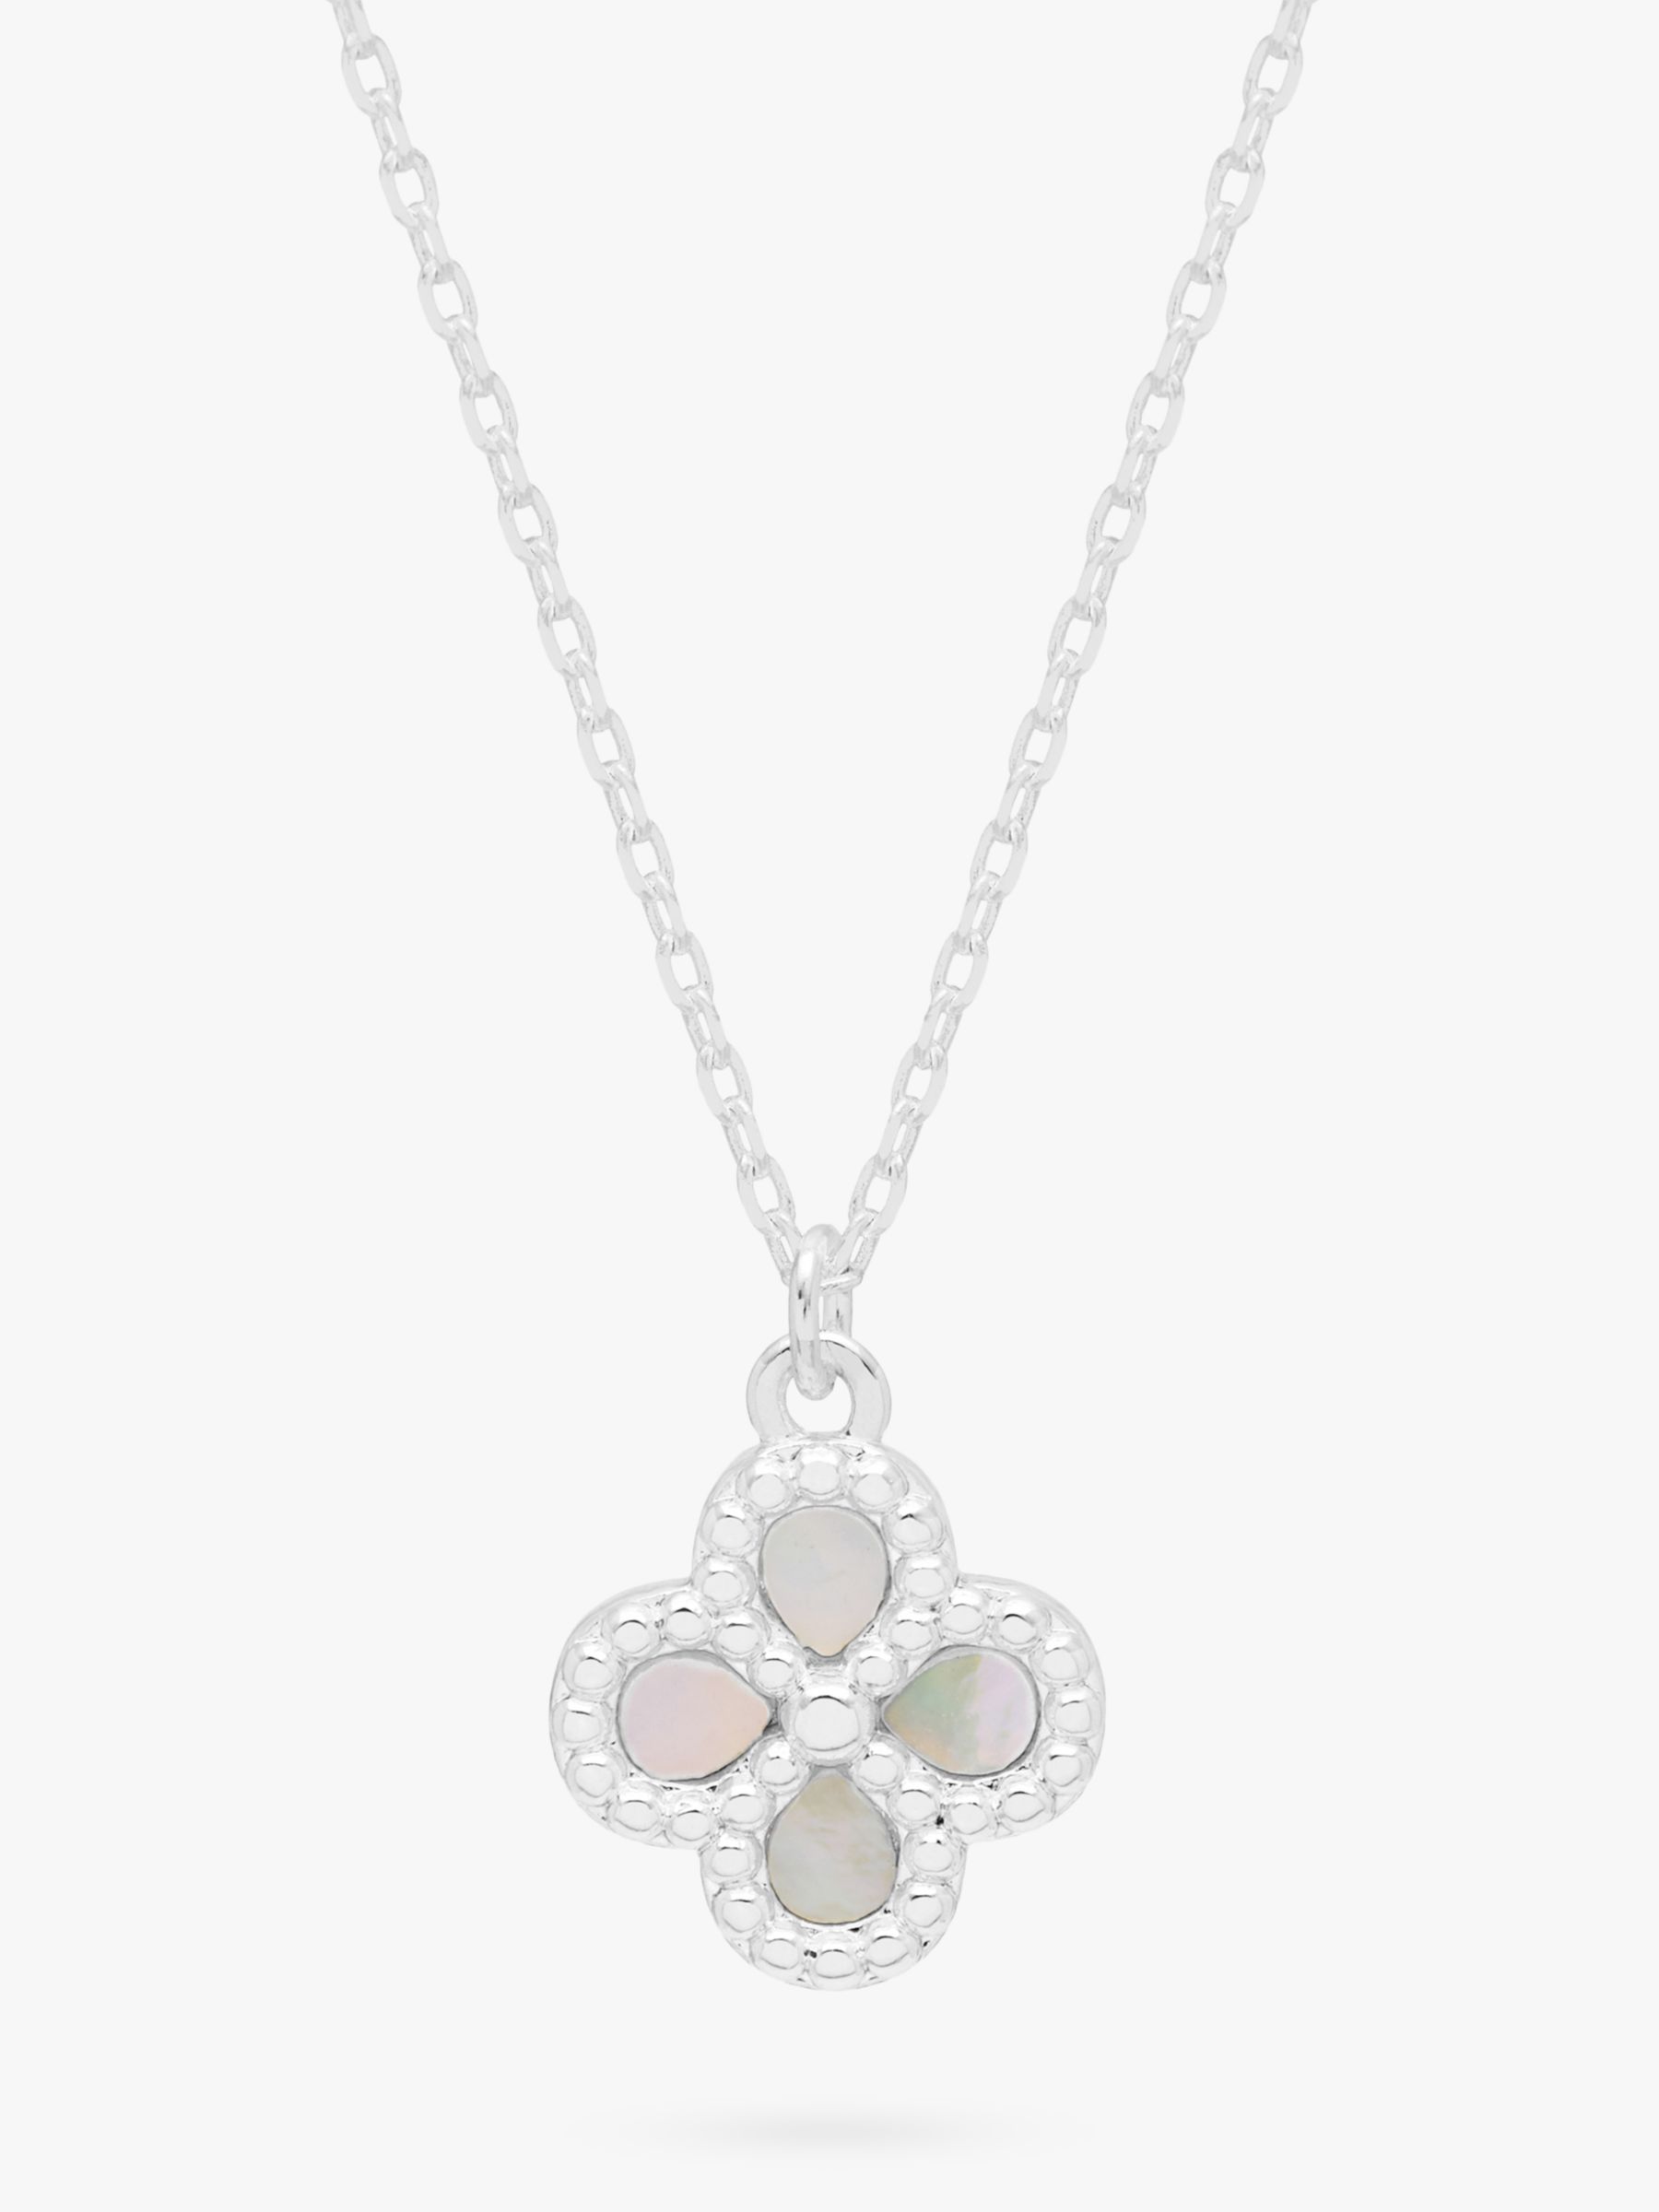 Estella Bartlett 'All Kinds of Wonderful' Dotted Pearl Flower Pendant Necklace, Silver